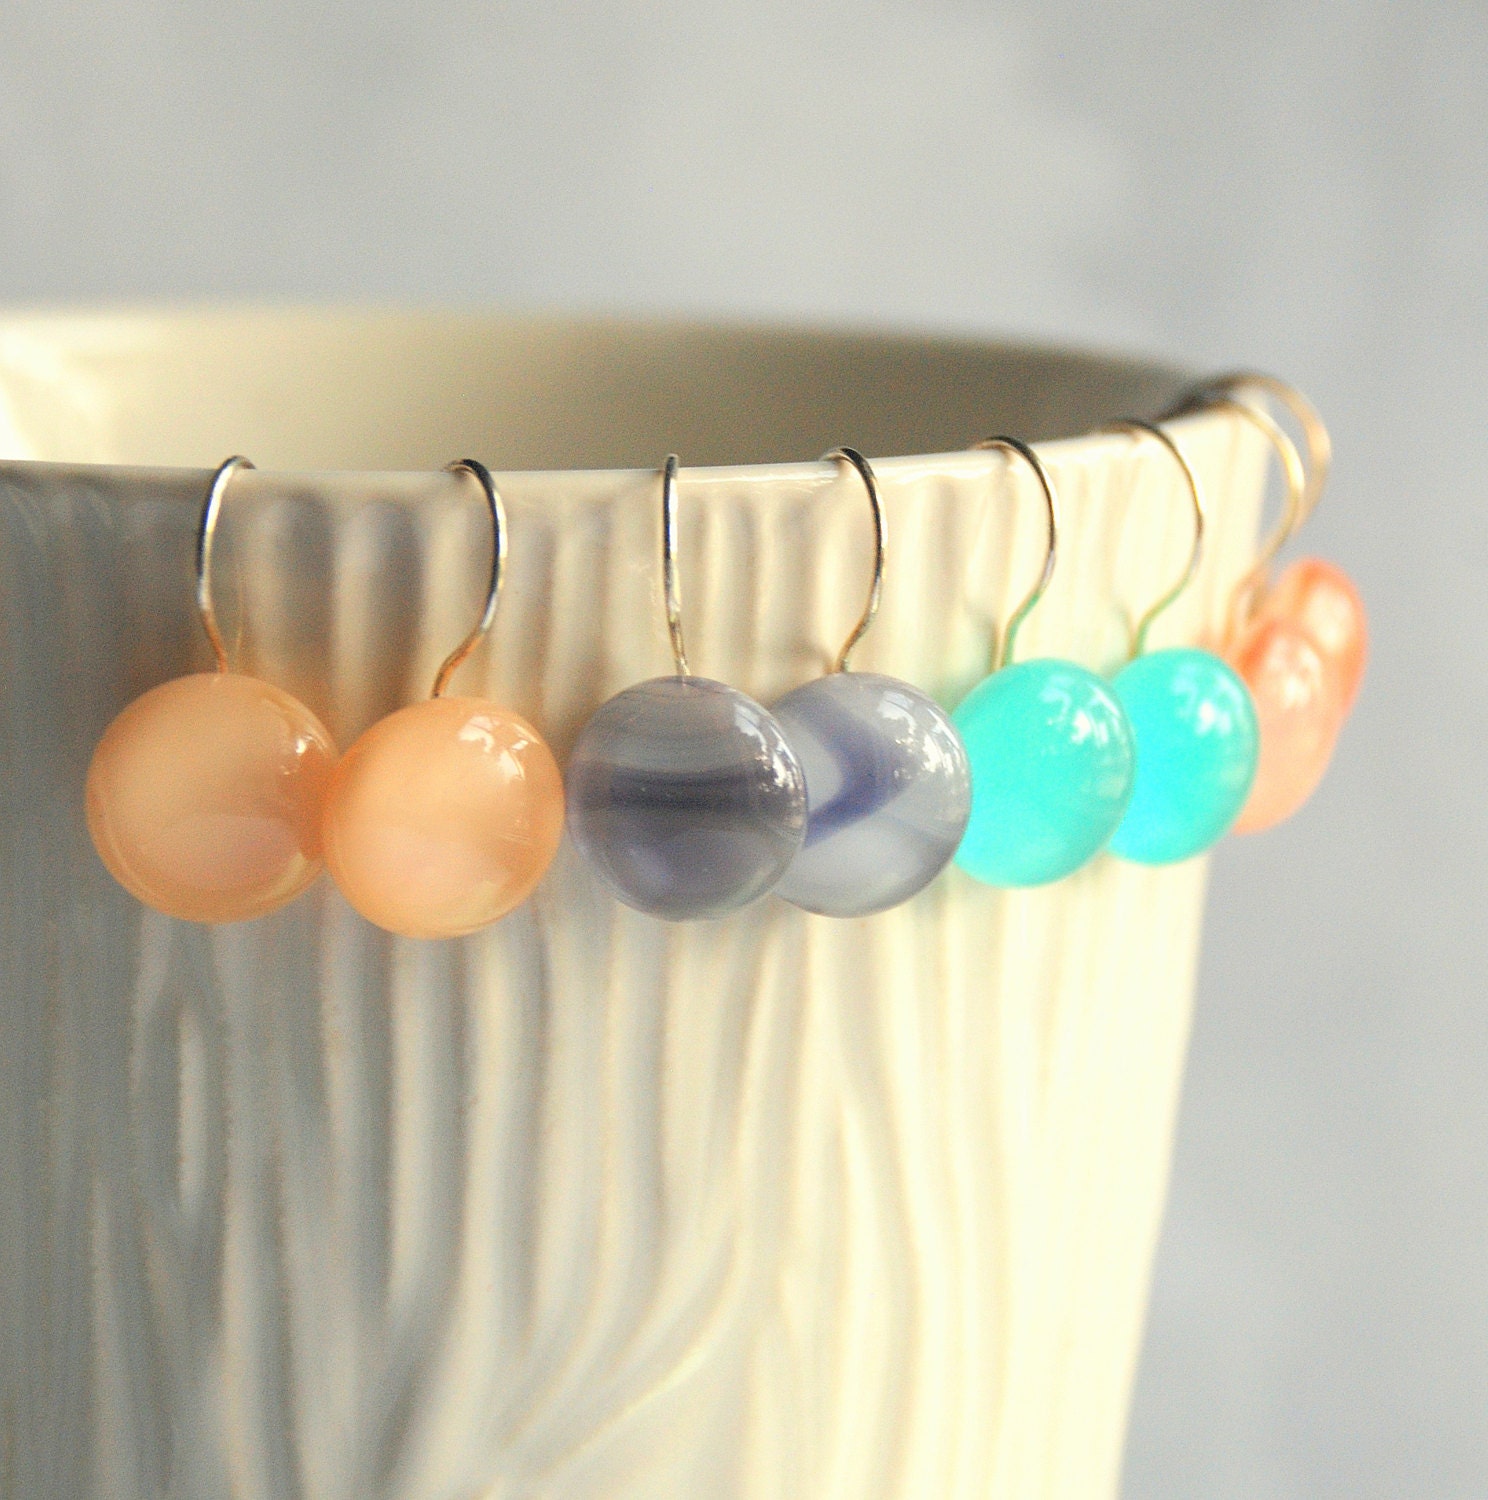 Jewelry Earrings Drop Choose Your Own Color SPRING PASTELS Fused Glass Earrings